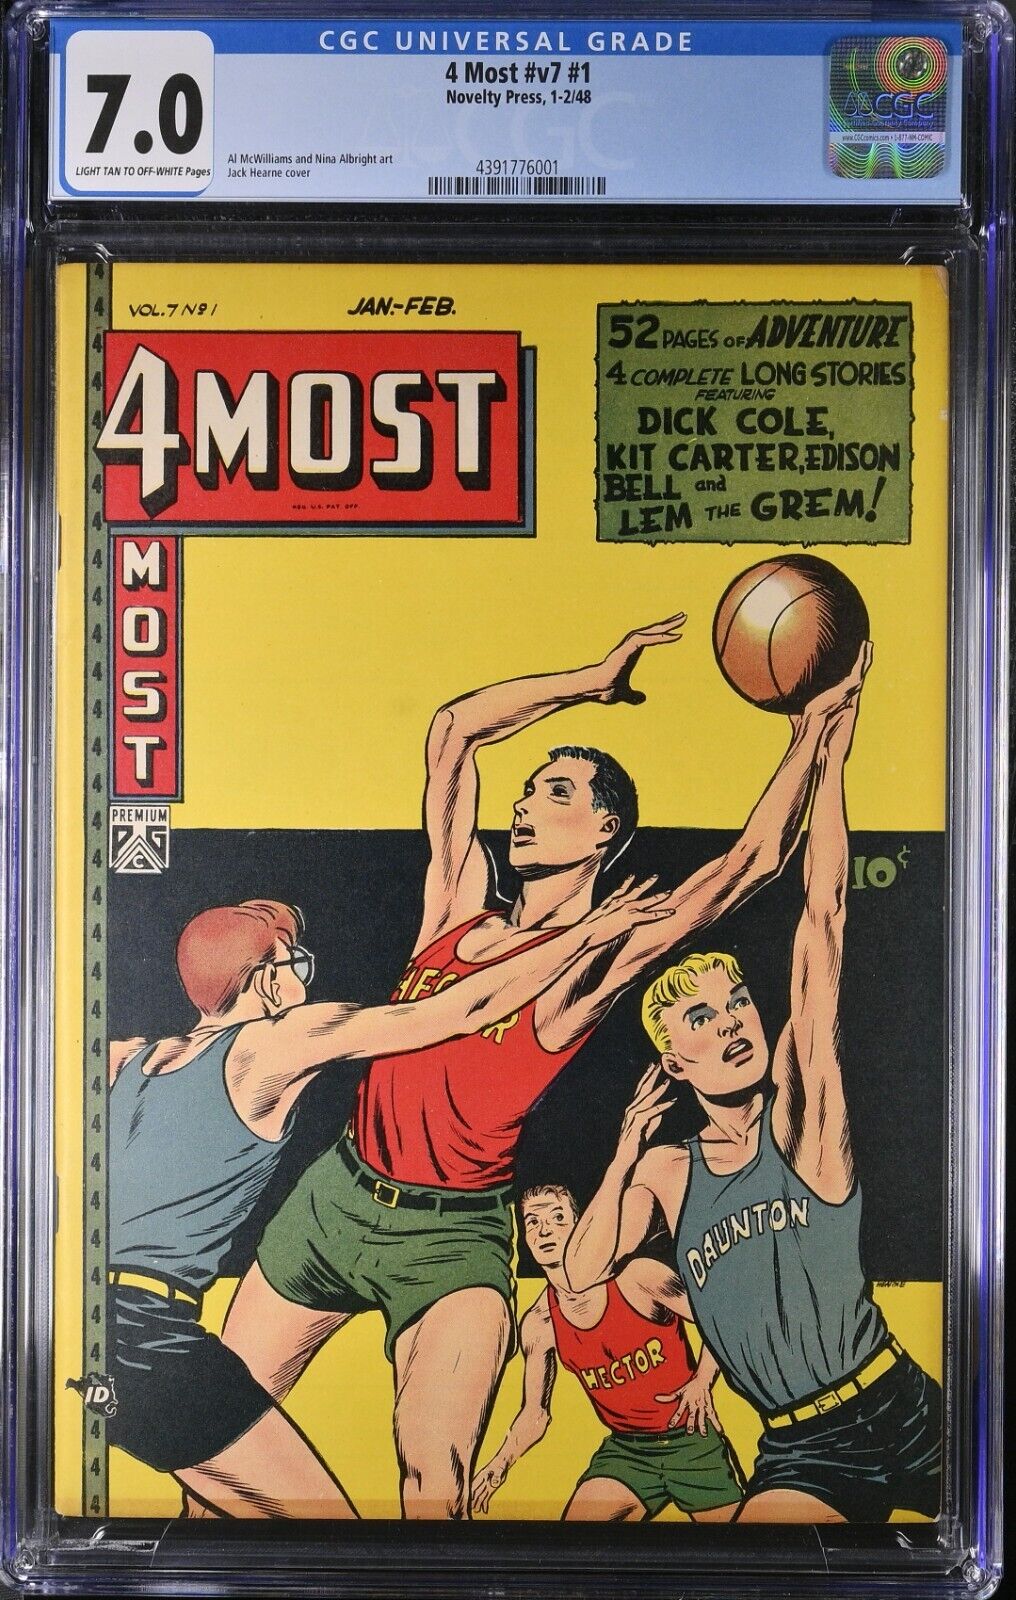 4 Most vol 7 #1 - CGC 7.0 (1948, Novelty Press) classic Hearne basketball cover